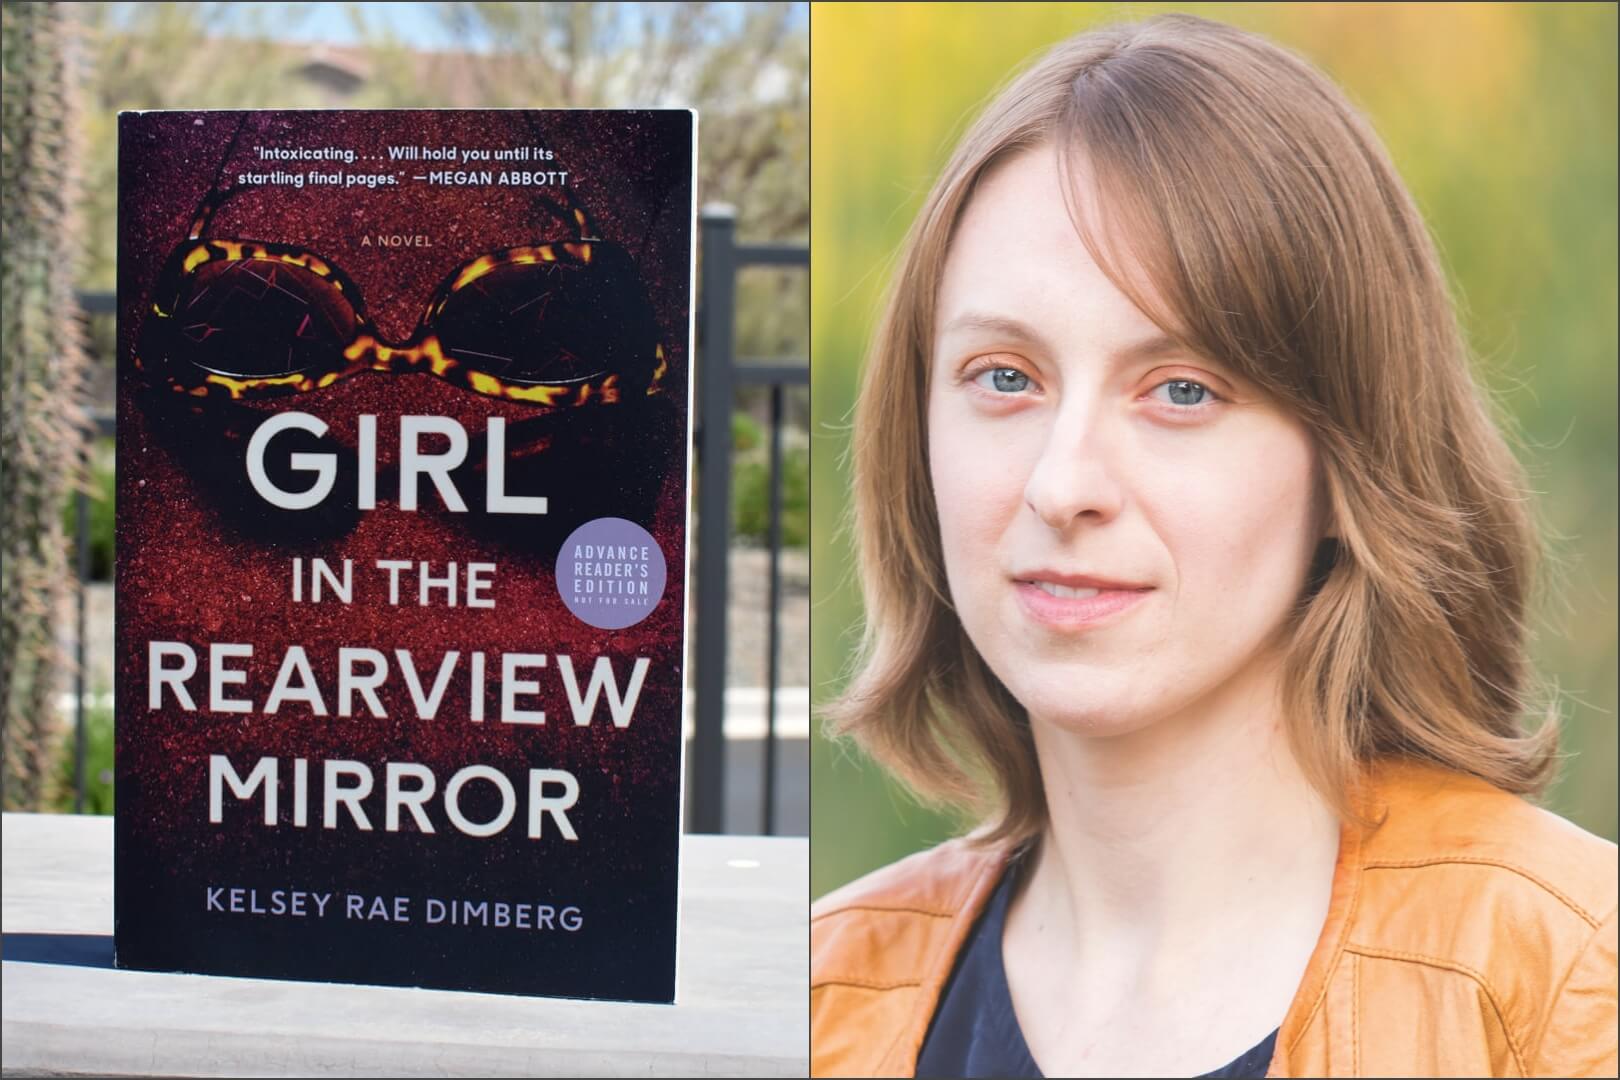 Q&A with Kelsey Rae Dimberg, Author of Girl in the Rearview Mirror